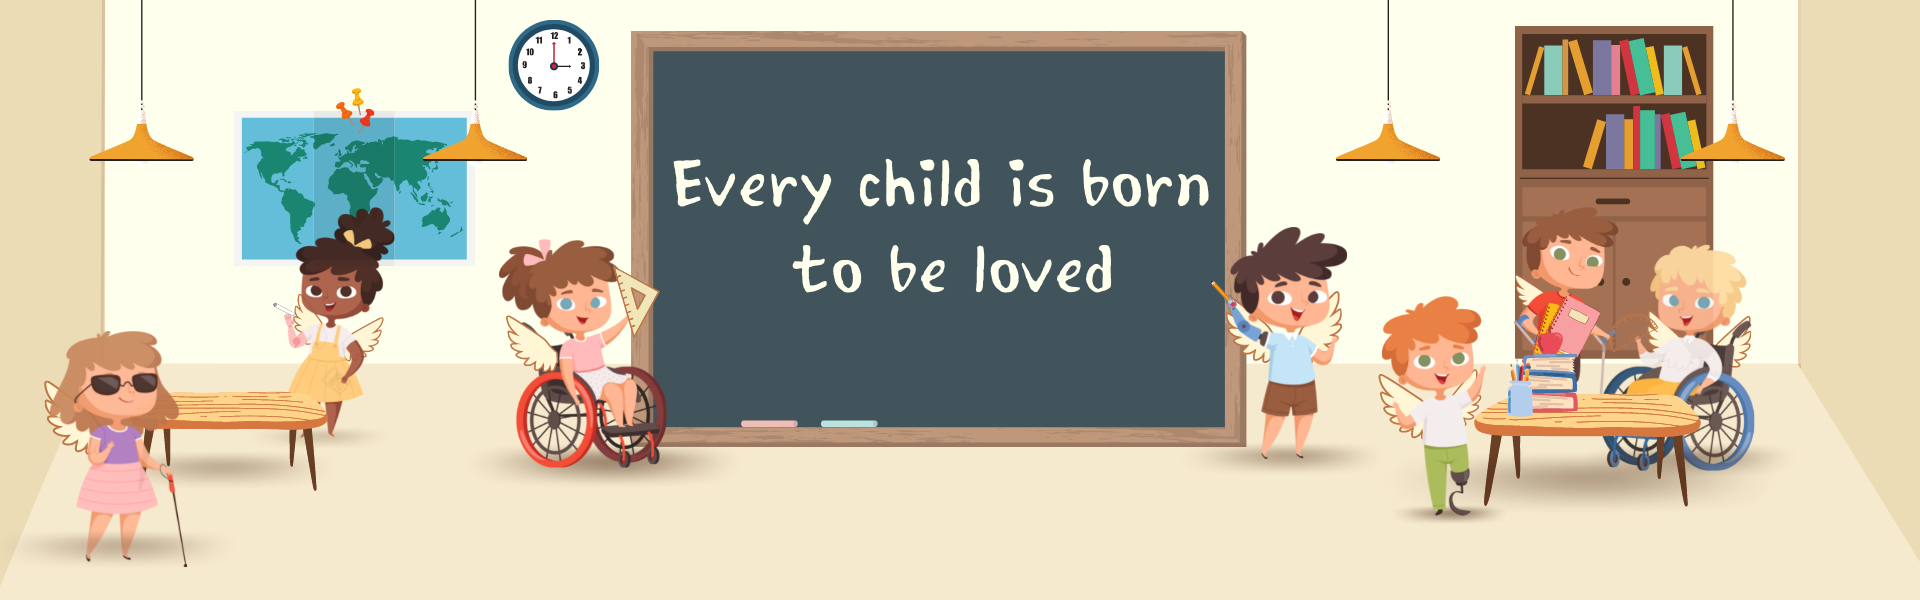 Every child is born to be loved